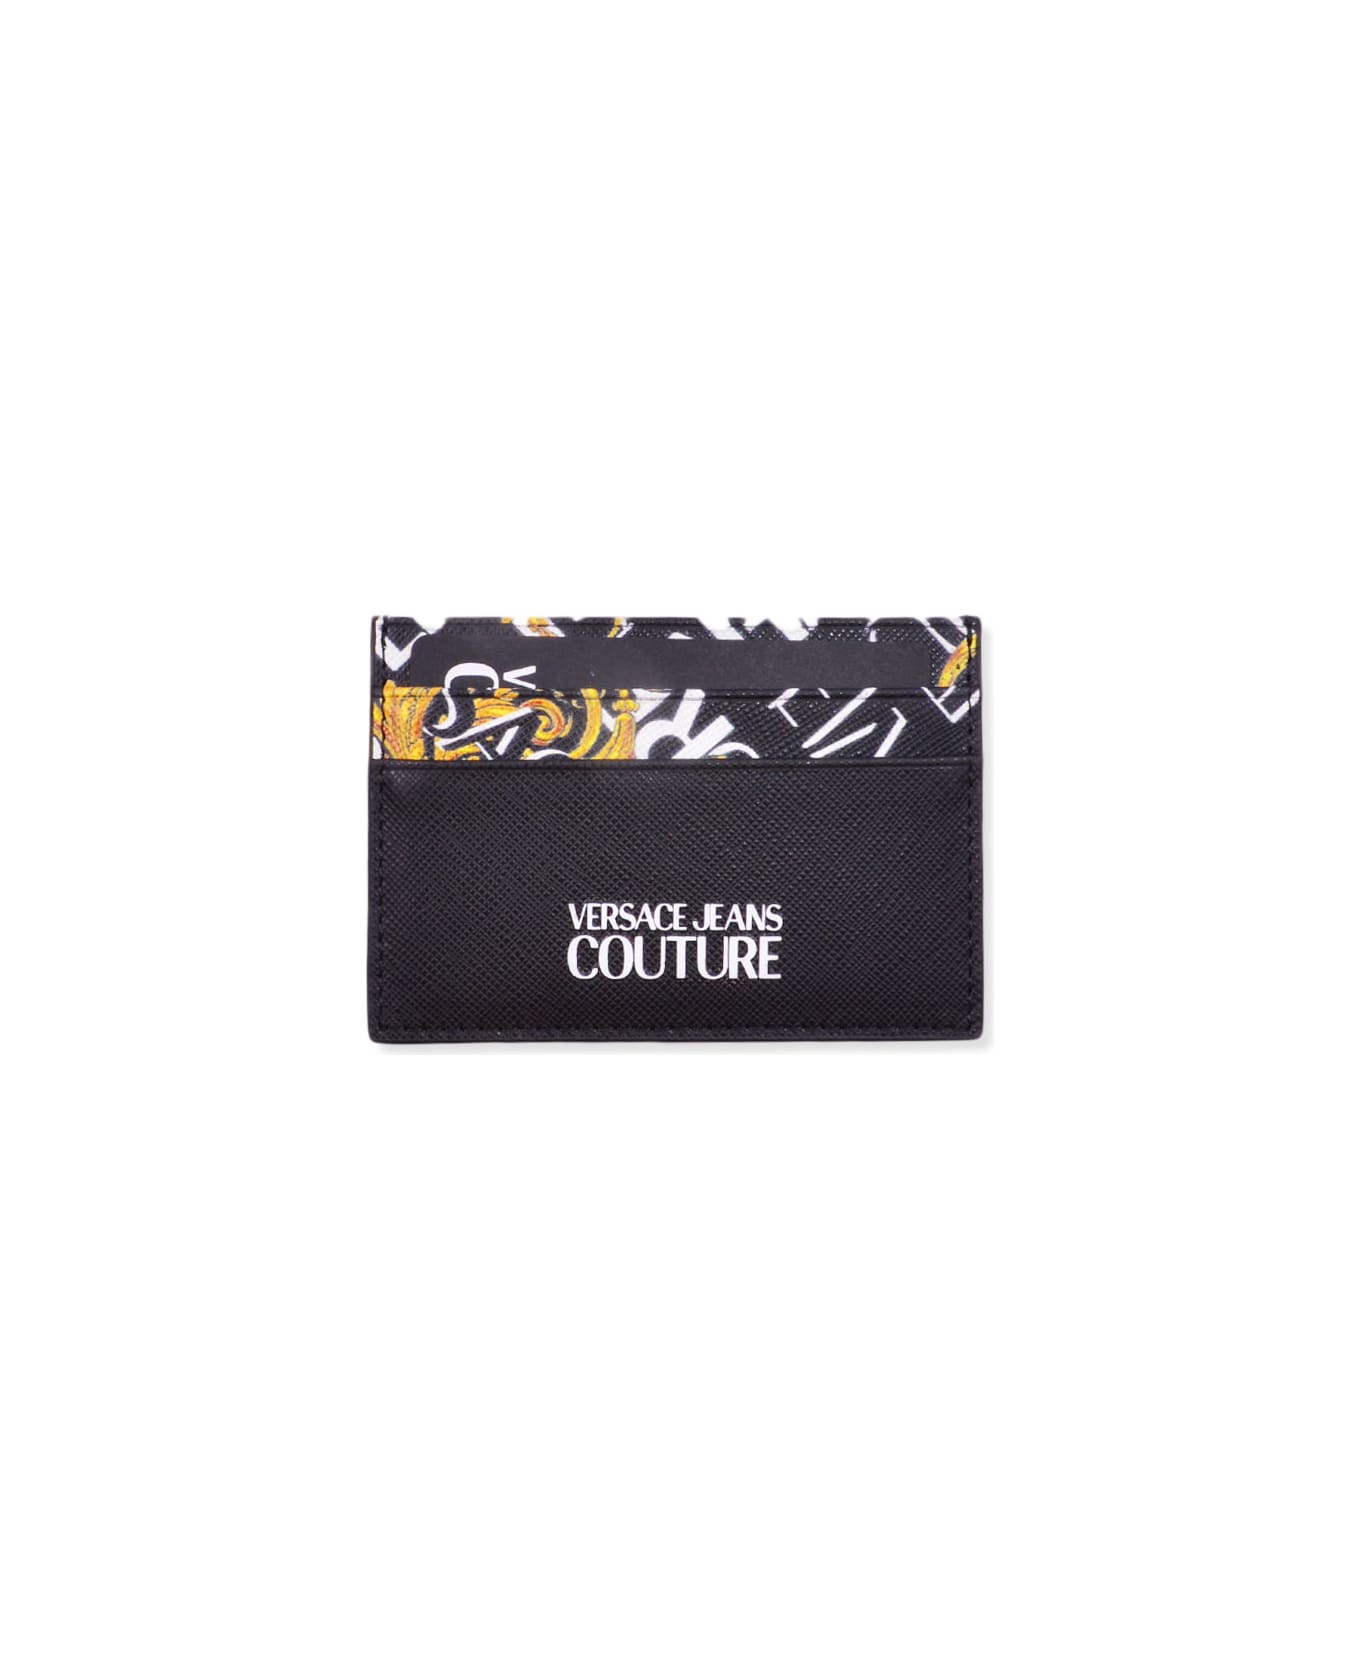 Versace Jeans Couture Leather Card Holder - Black 財布